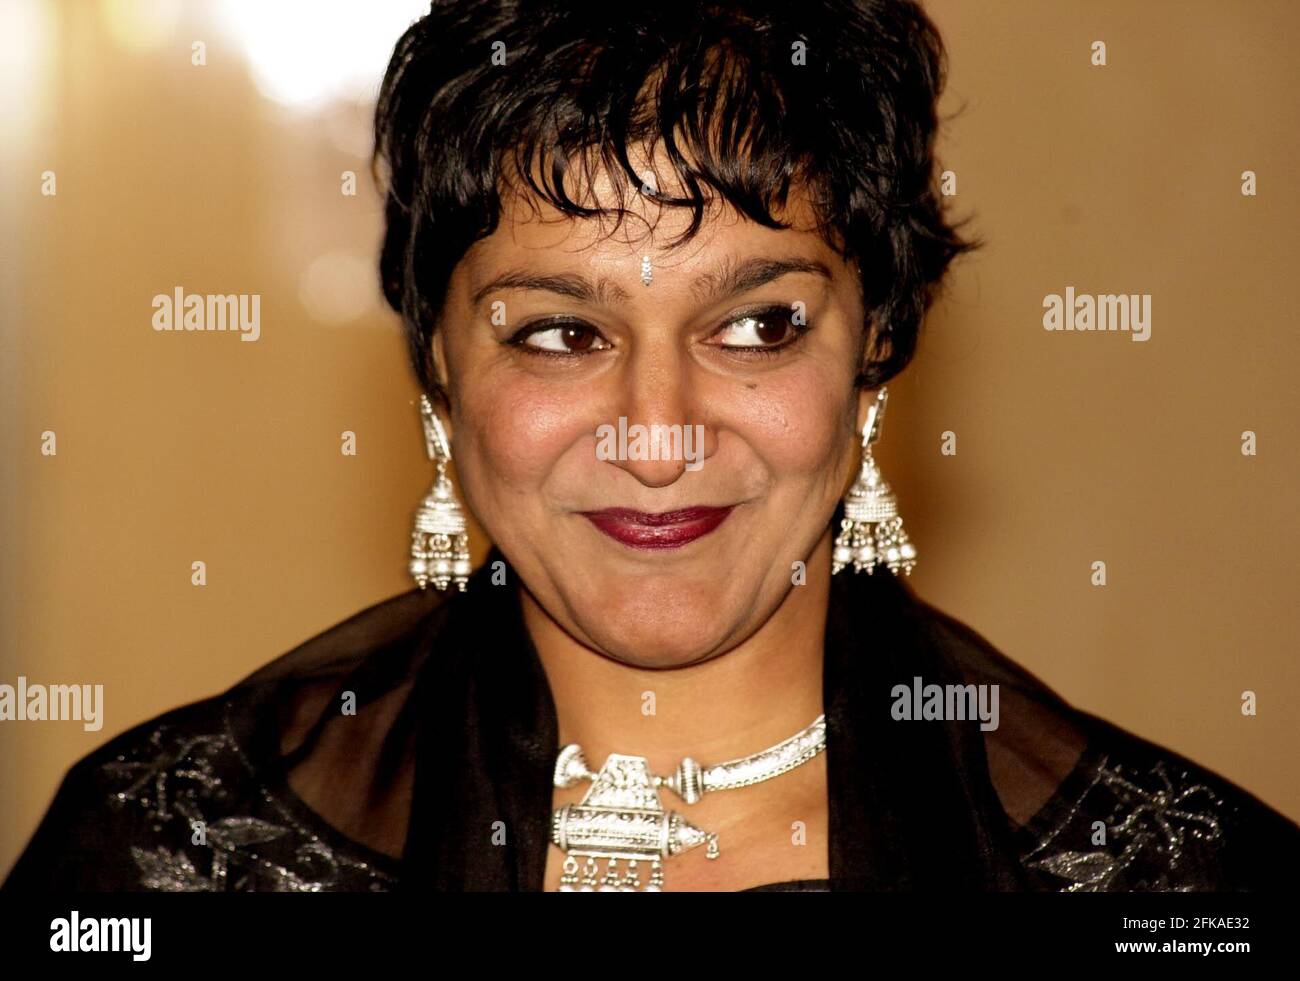 MEERA SYAL MAY 2001STAR OF TV PROGRAMME 'GOODNESS GRACIOUS ME' ARRIVING AT THE LONDON HILTON THIS EVENING FOR THE ASIAN WOMAN OF THE YEAR AWARD OF WHICH SHE WAS NOMINATED Stock Photo